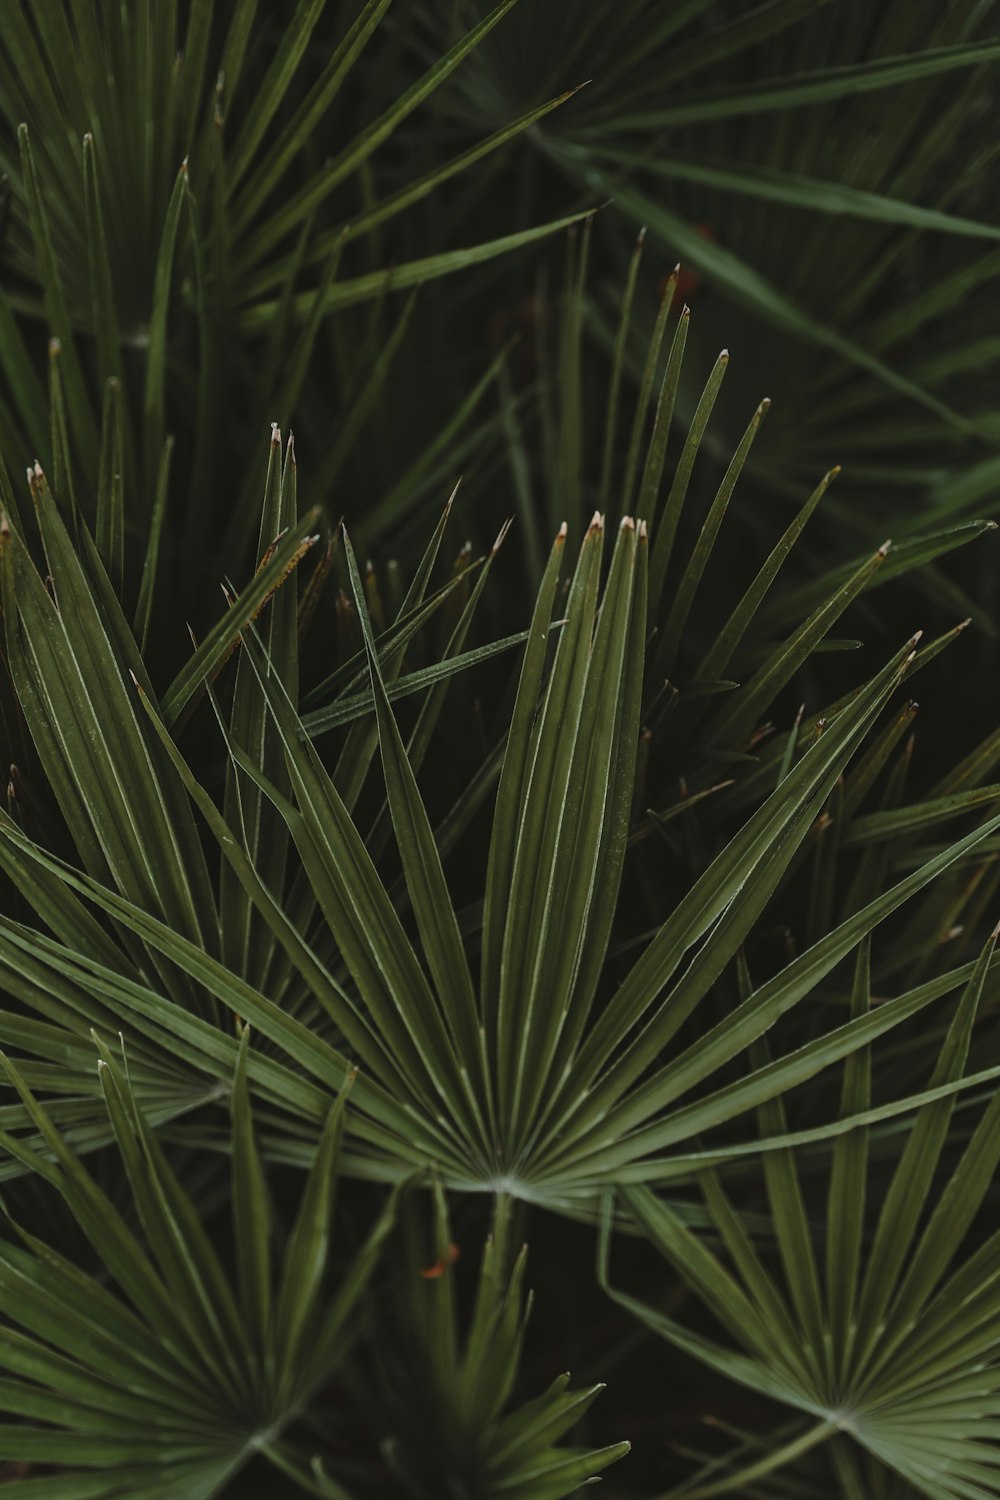 a close up view of a pine tree's needles